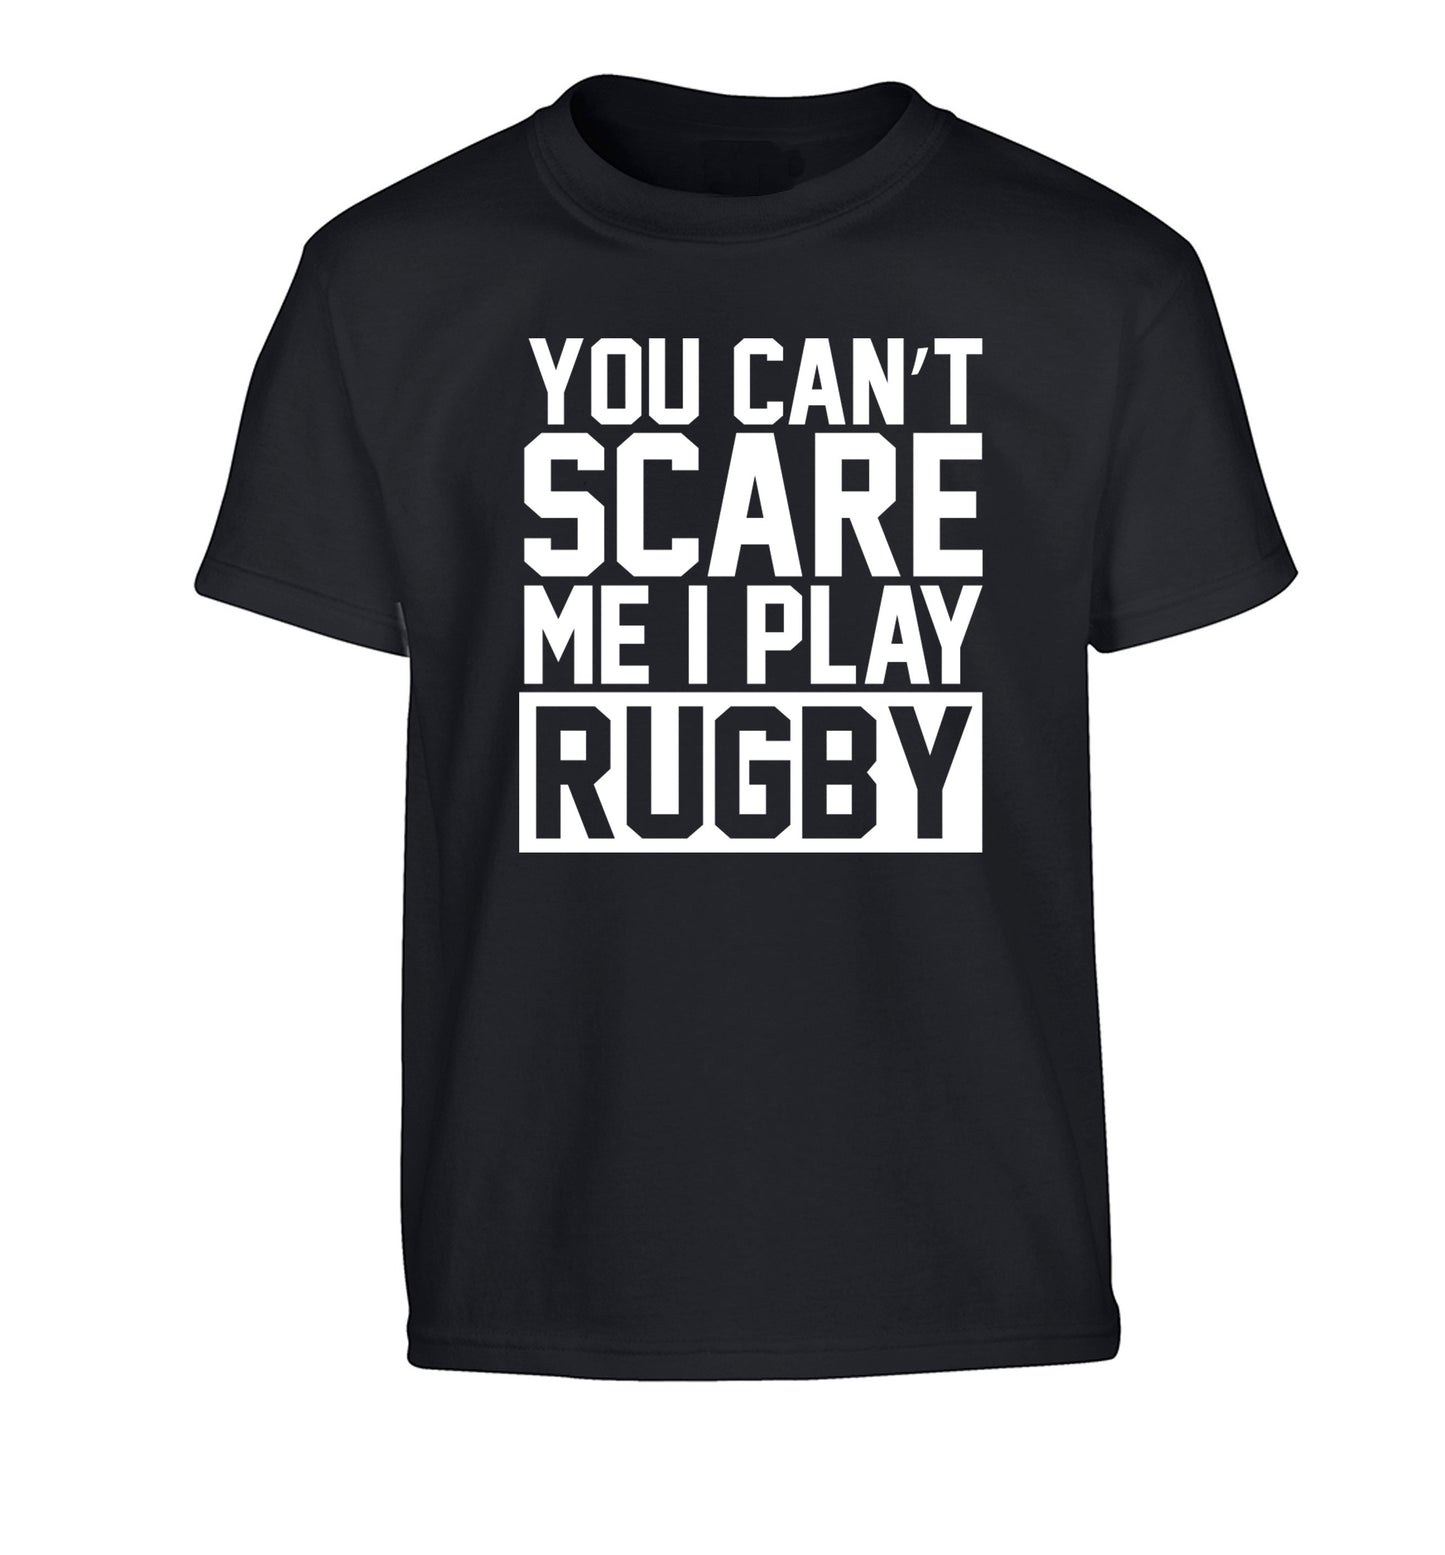 You can't scare me I play rugby Children's black Tshirt 12-14 Years